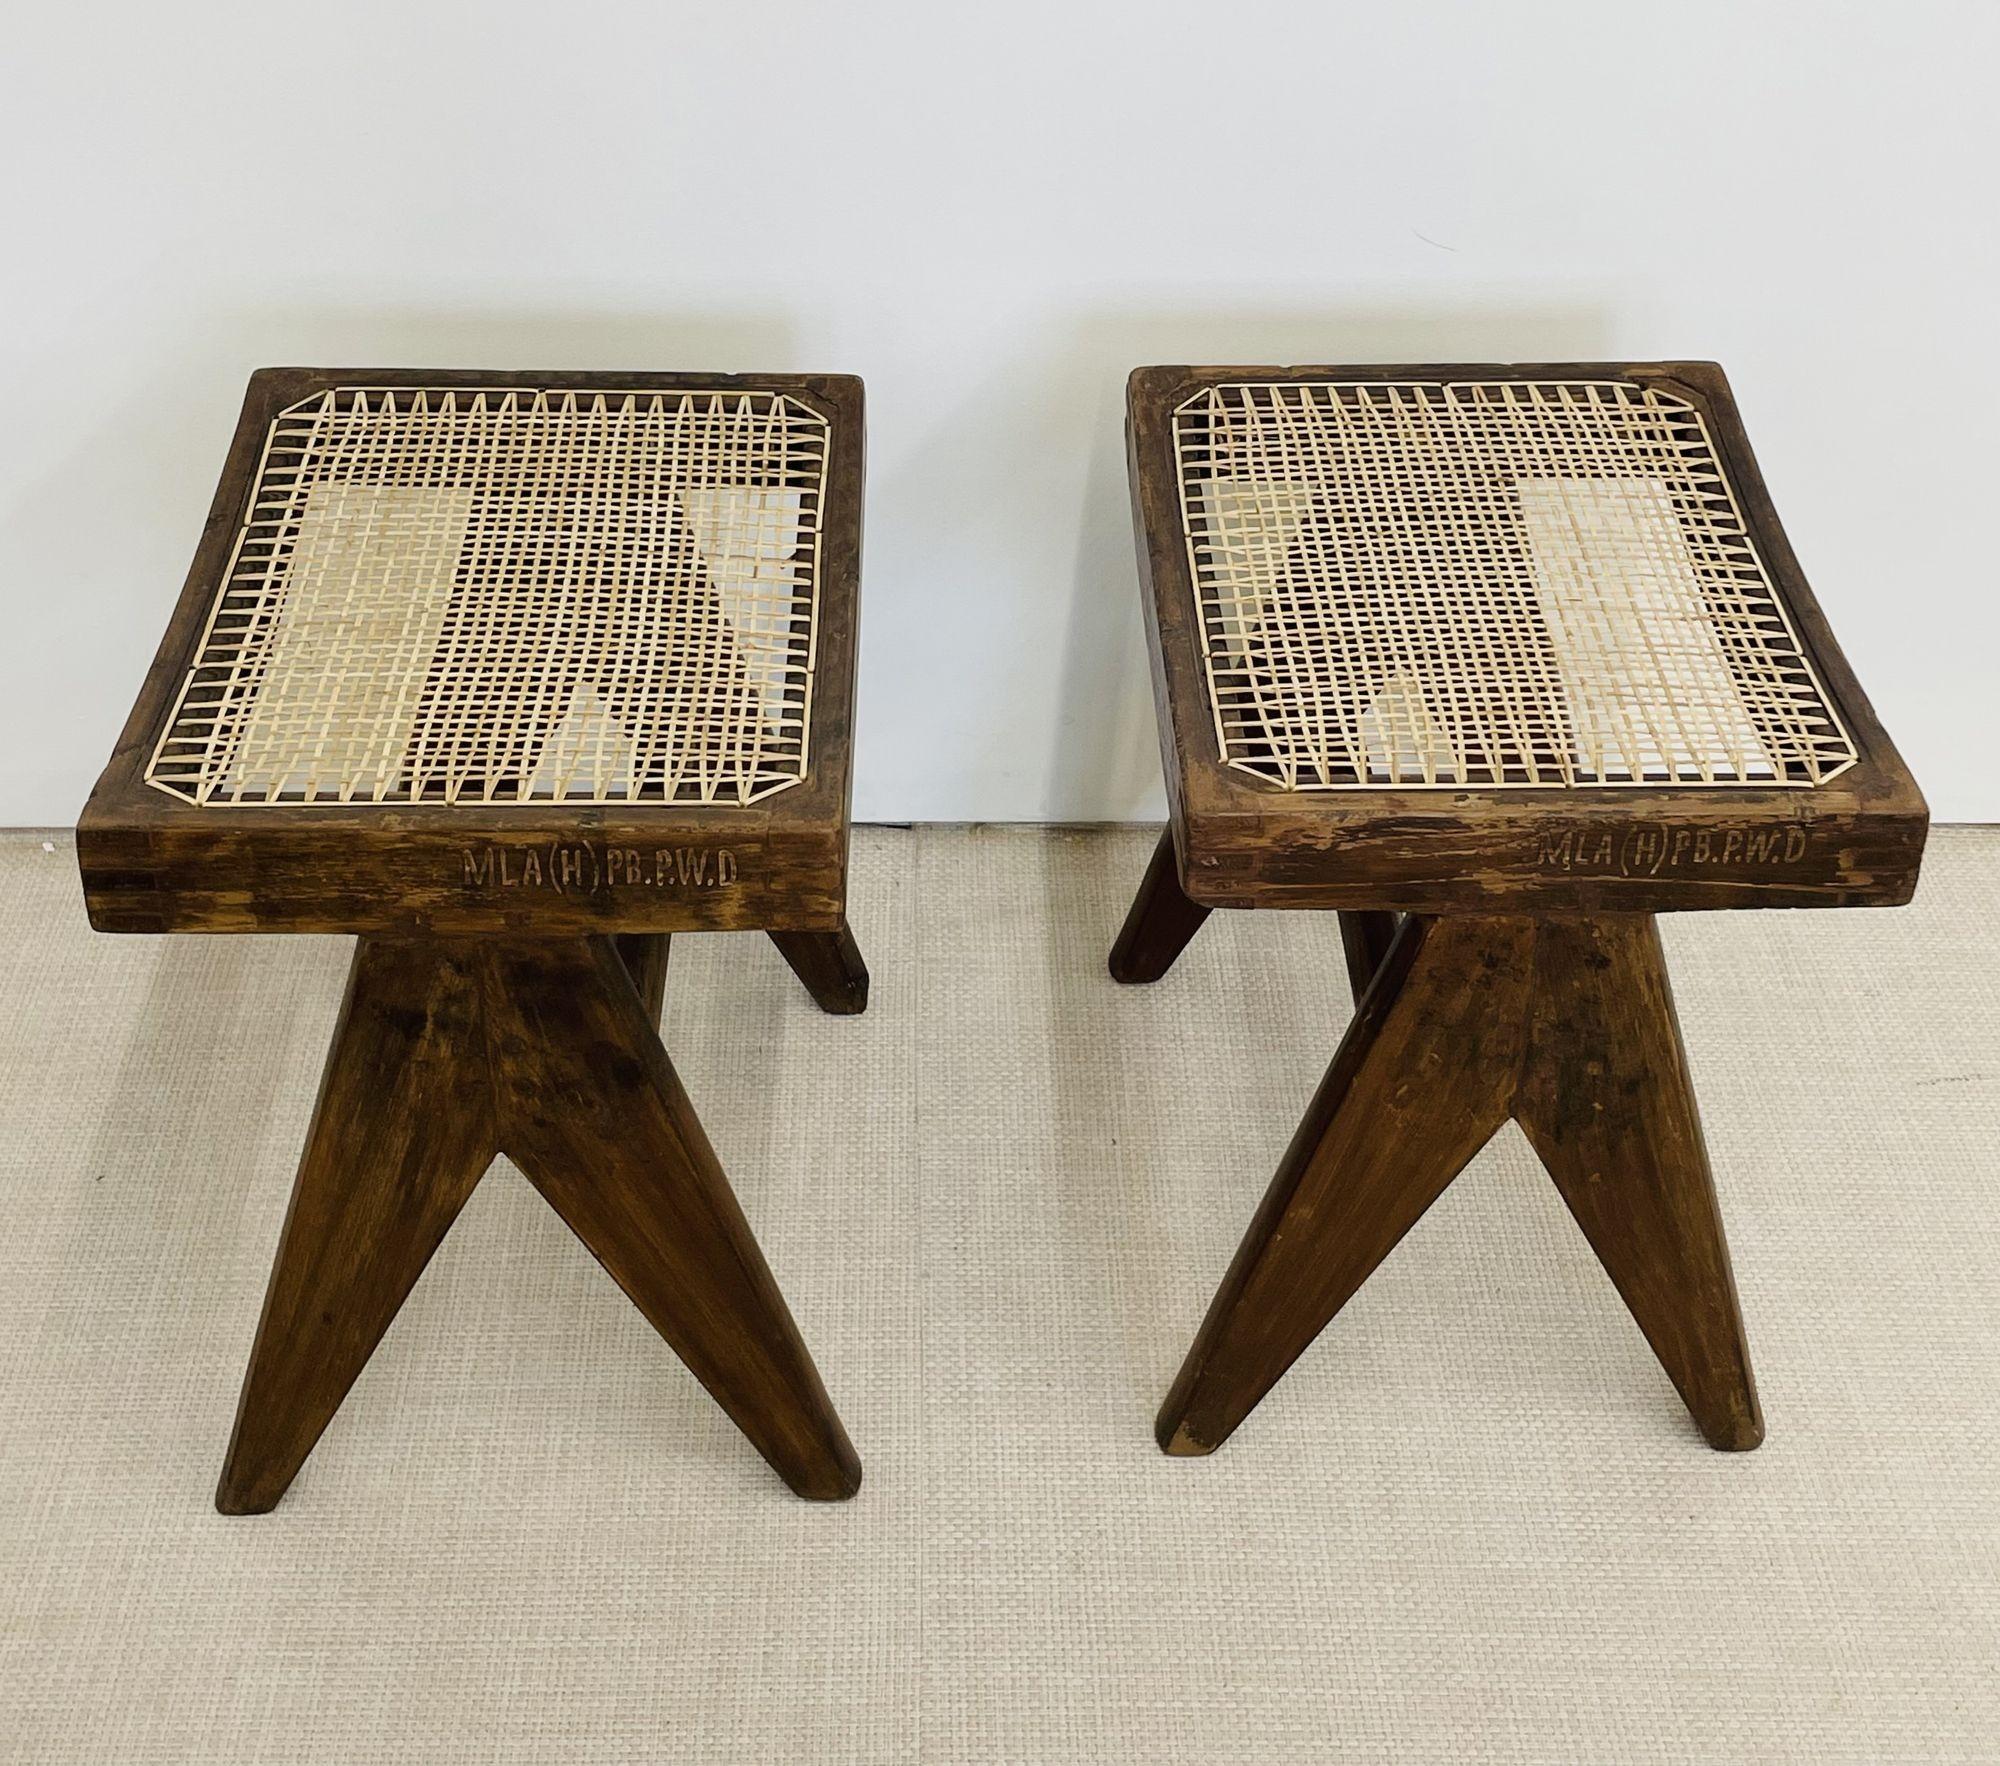 20th Century Pair of Authentic Pierre Jeanneret Low Stools/Ottomans, Mid-Century Modern